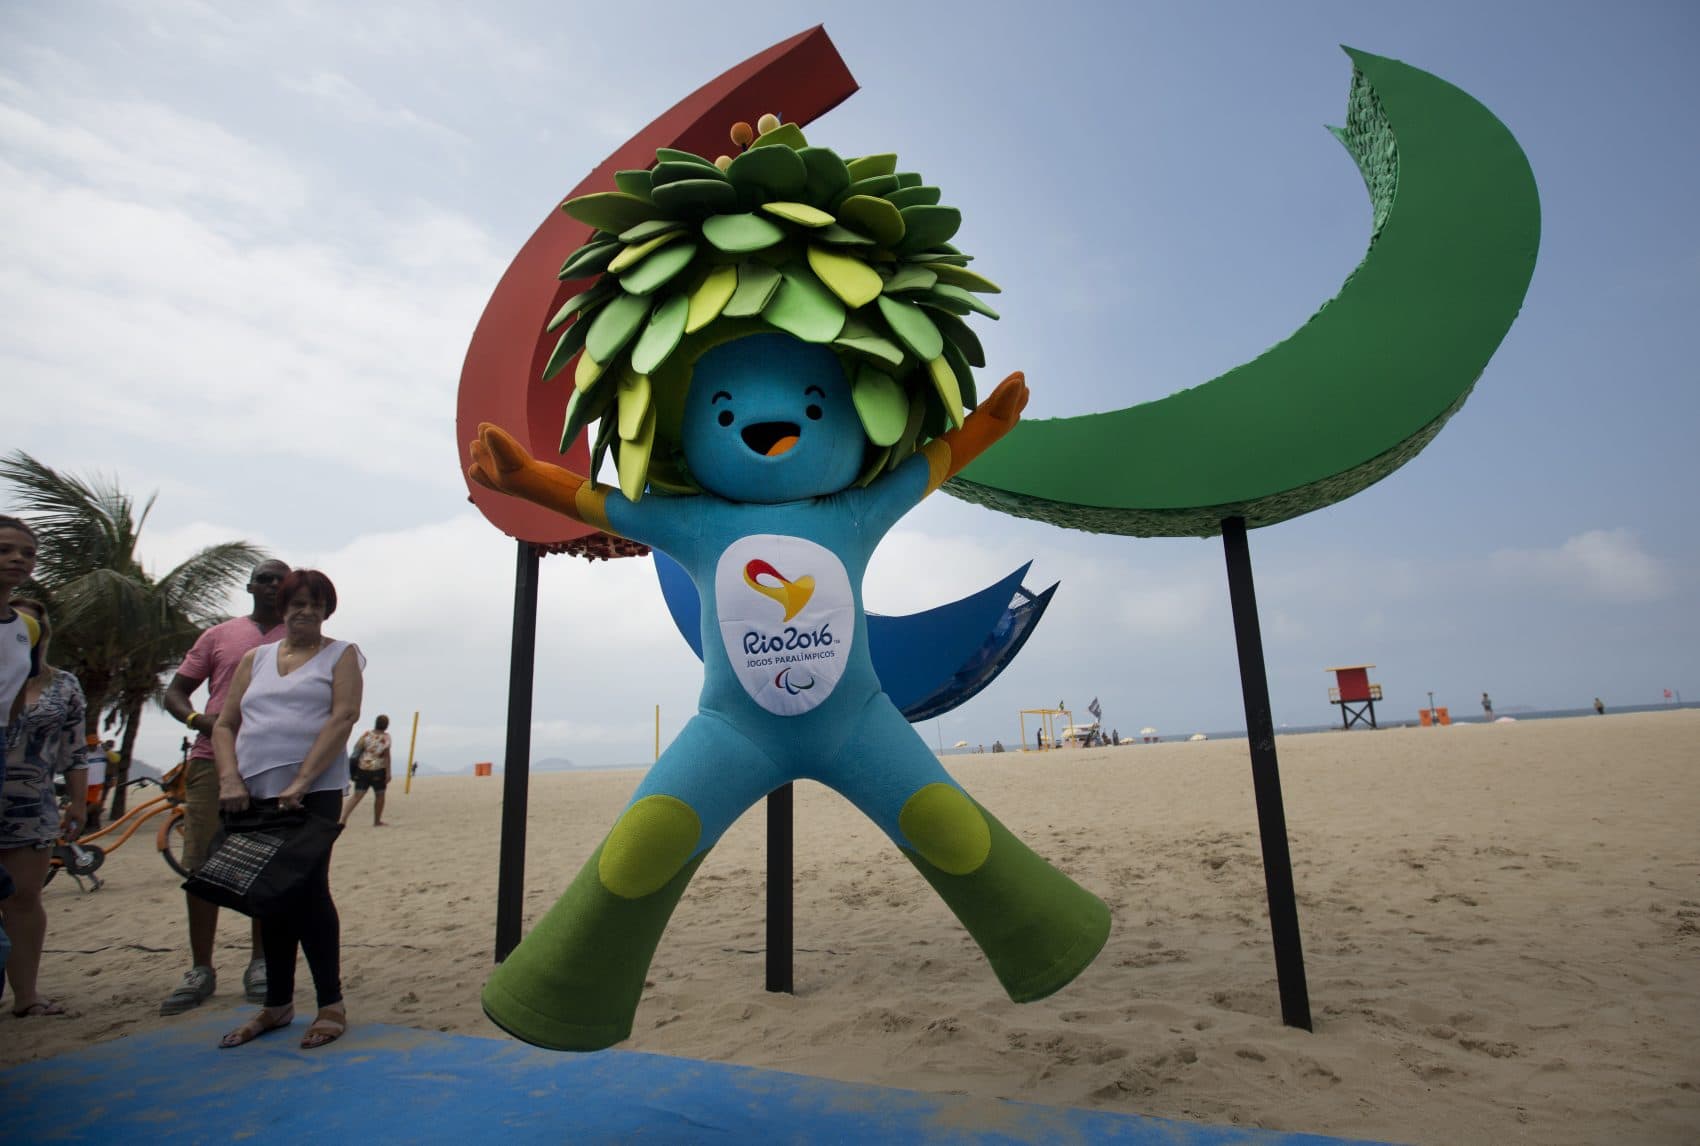 Tom, the mascot of the Rio Paralympics Games, jumps in front of the sculpture of Agitos, symbol of the Paralympic Games, on Copacabana beach in Rio de Janeiro. (Silvia Izquierdo/AP)